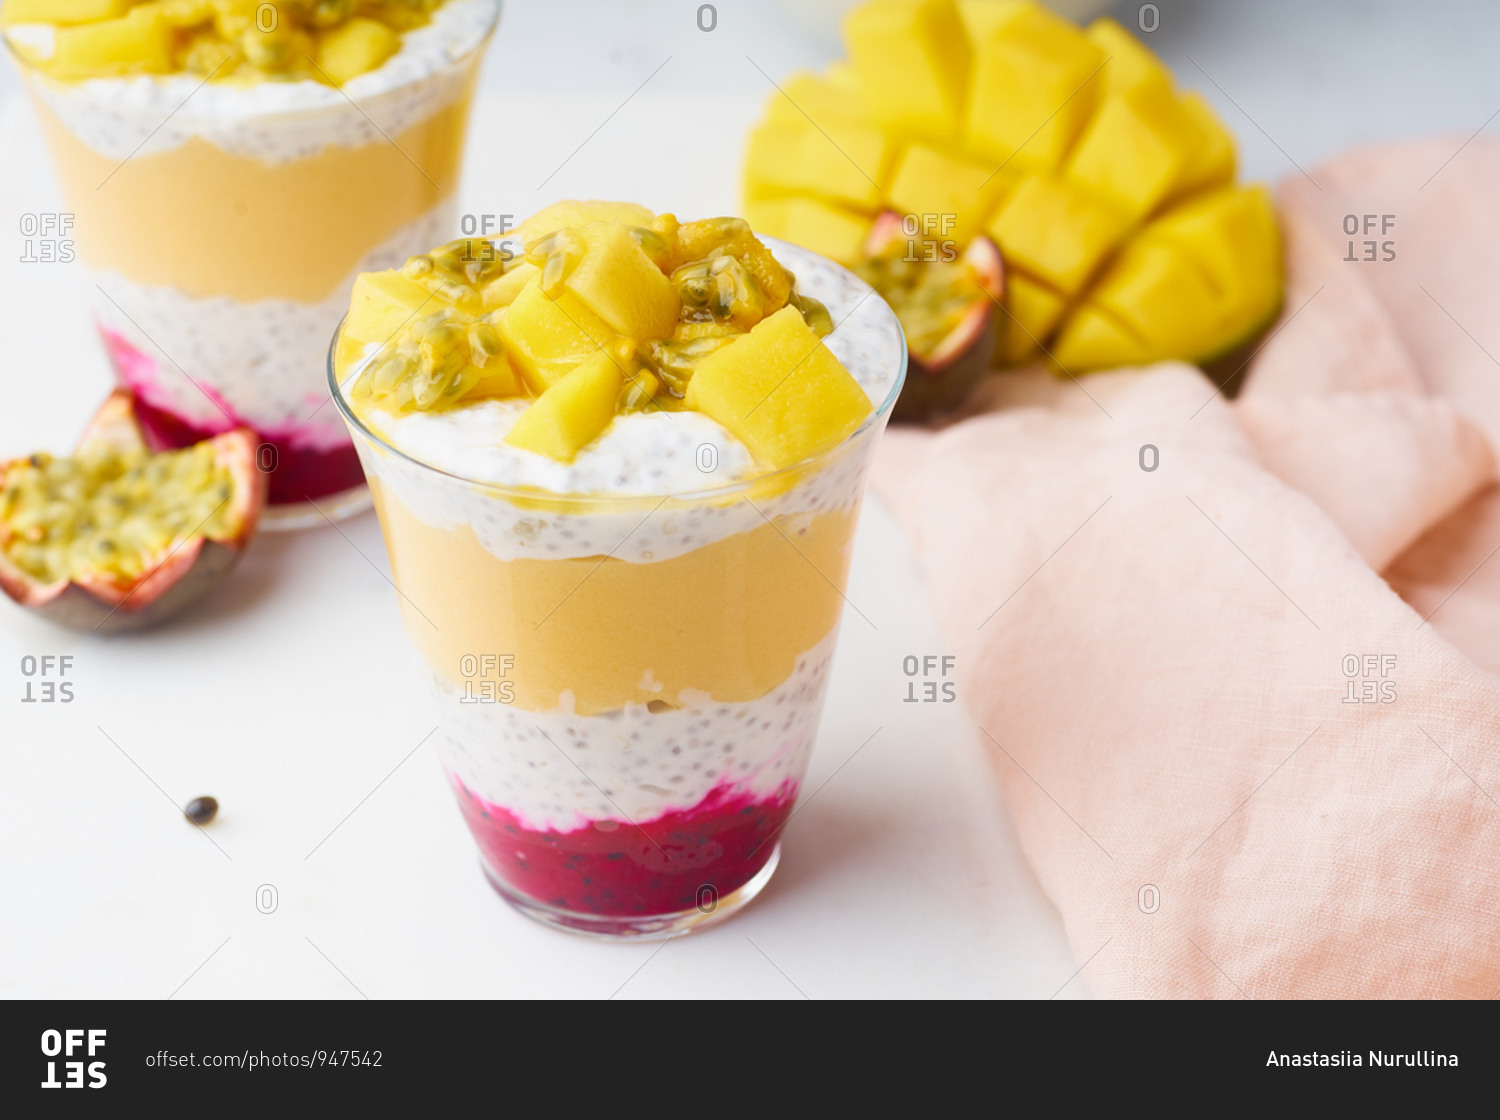 Chia pudding with mango and tropical fruits smoothie. Healthy gourmet breakfast.